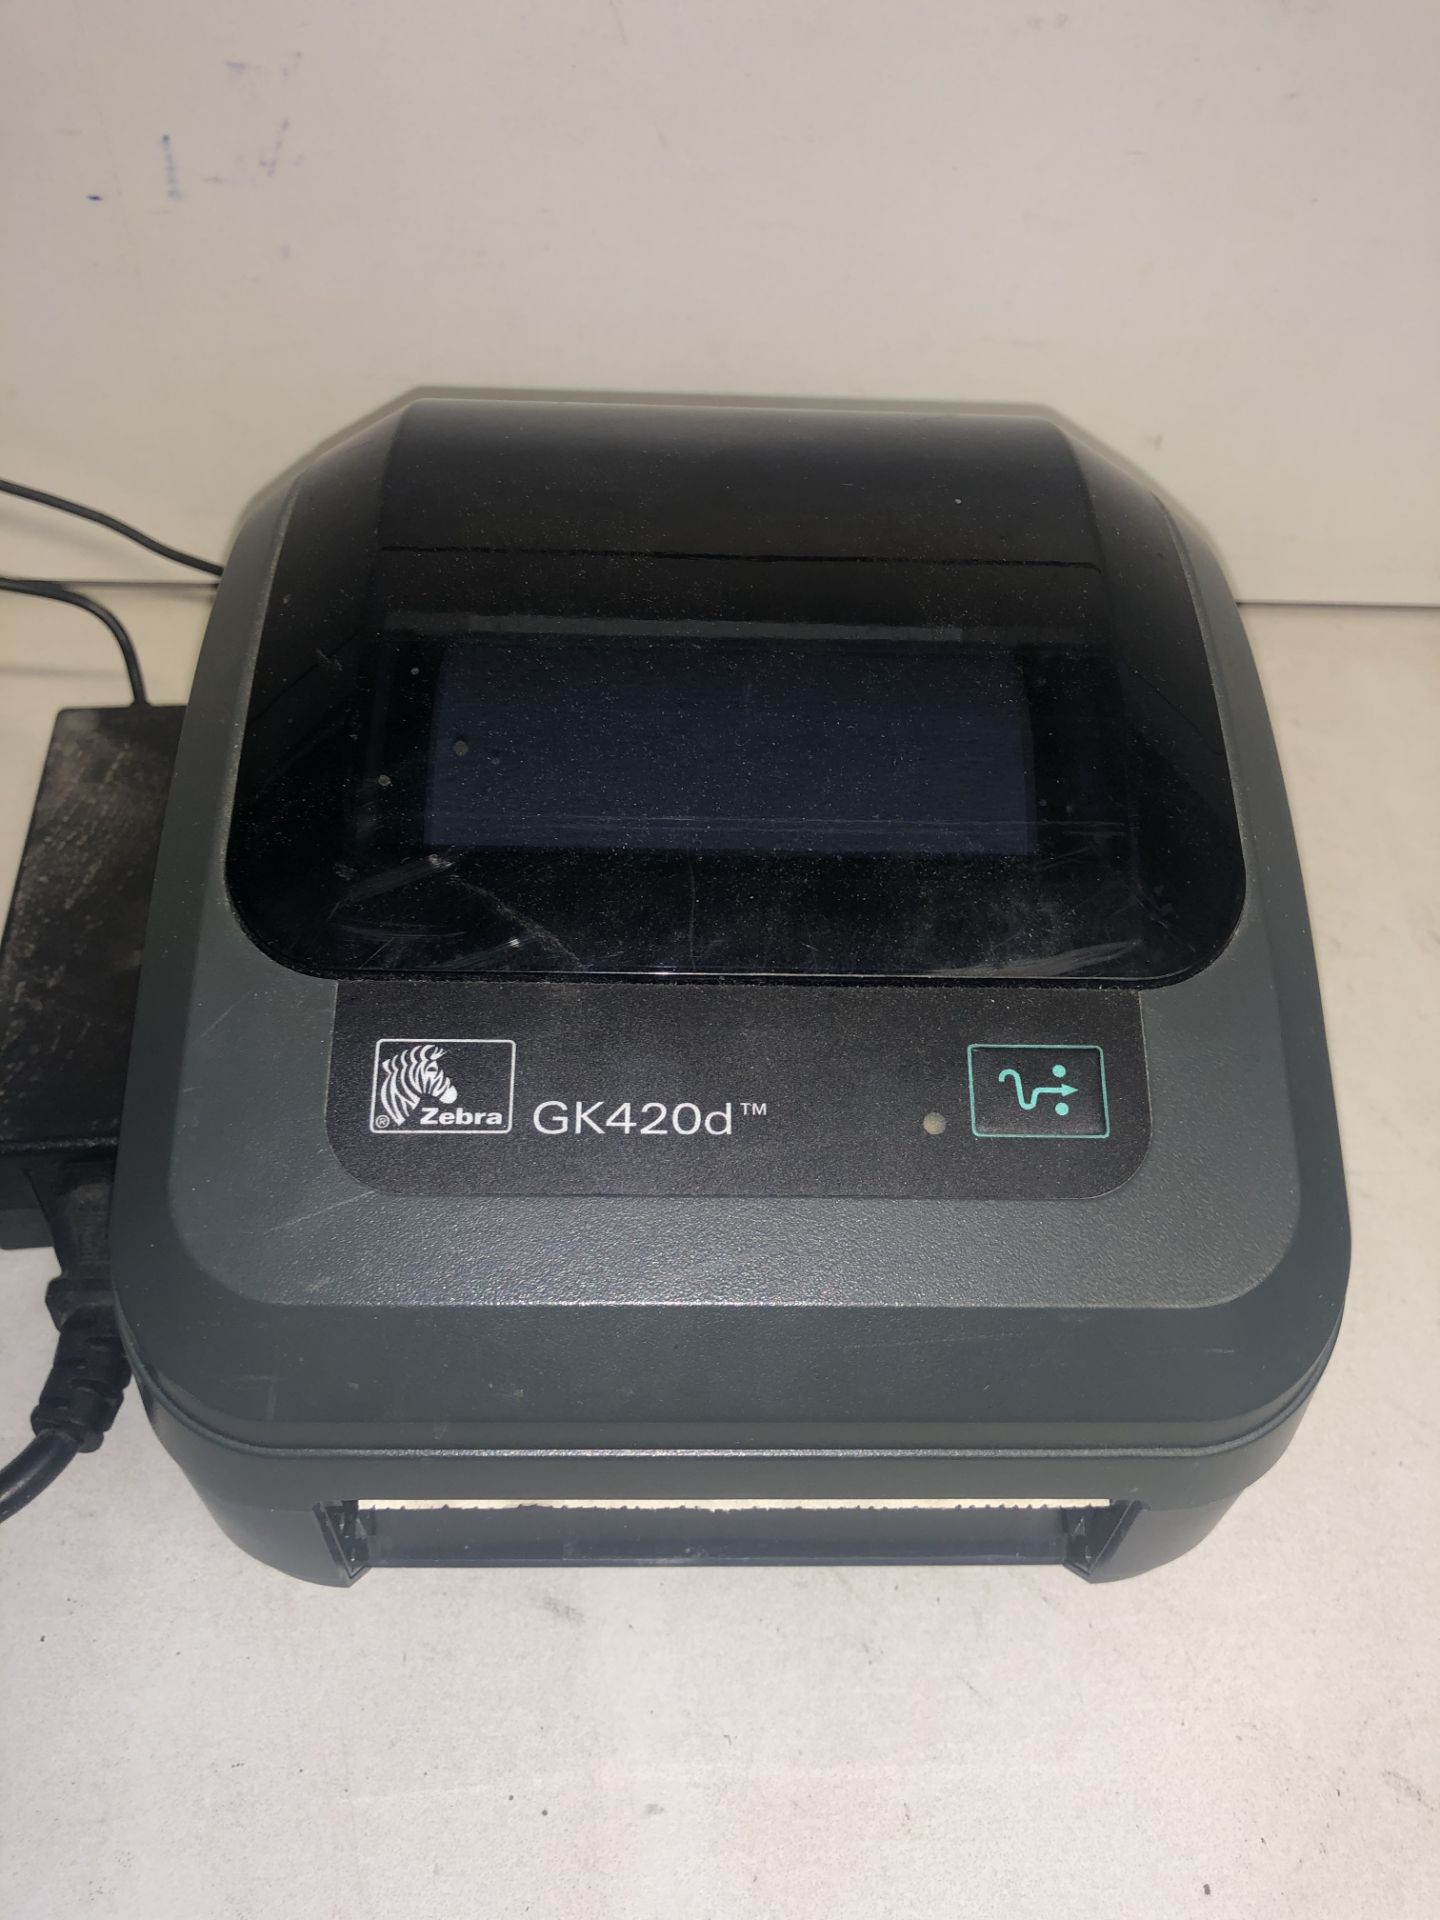 Zebra GK420d Label/Barcode Printer w/ Power Lead & USB Cable - Image 2 of 3